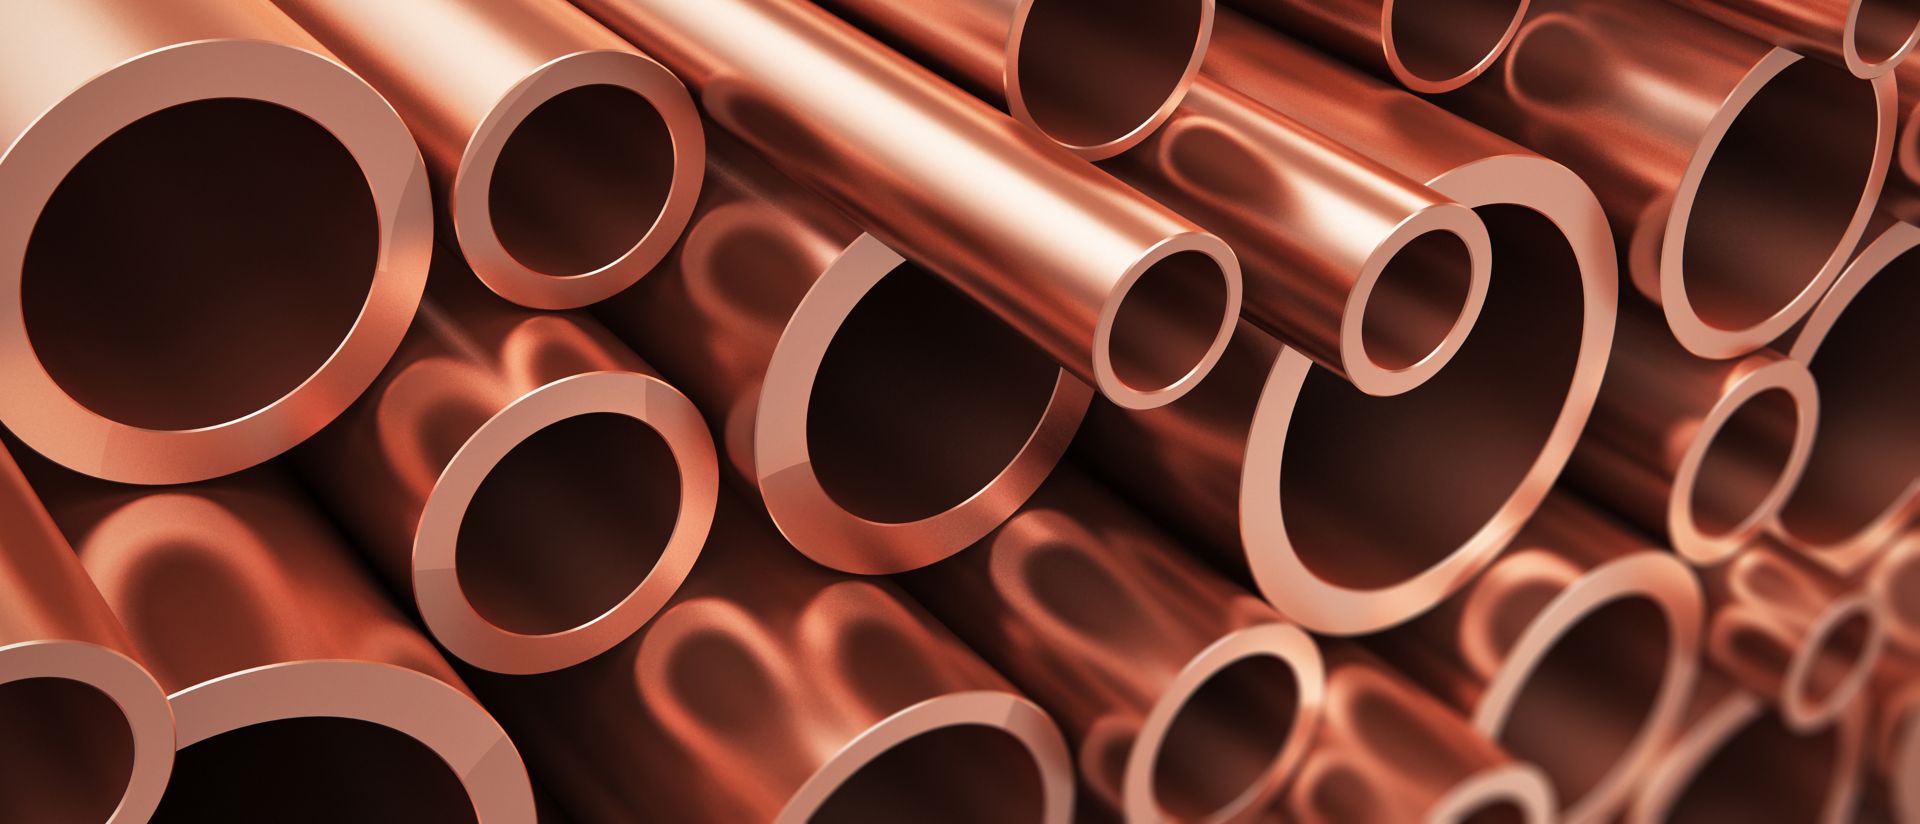 Image of a stack of copper metal pipes 